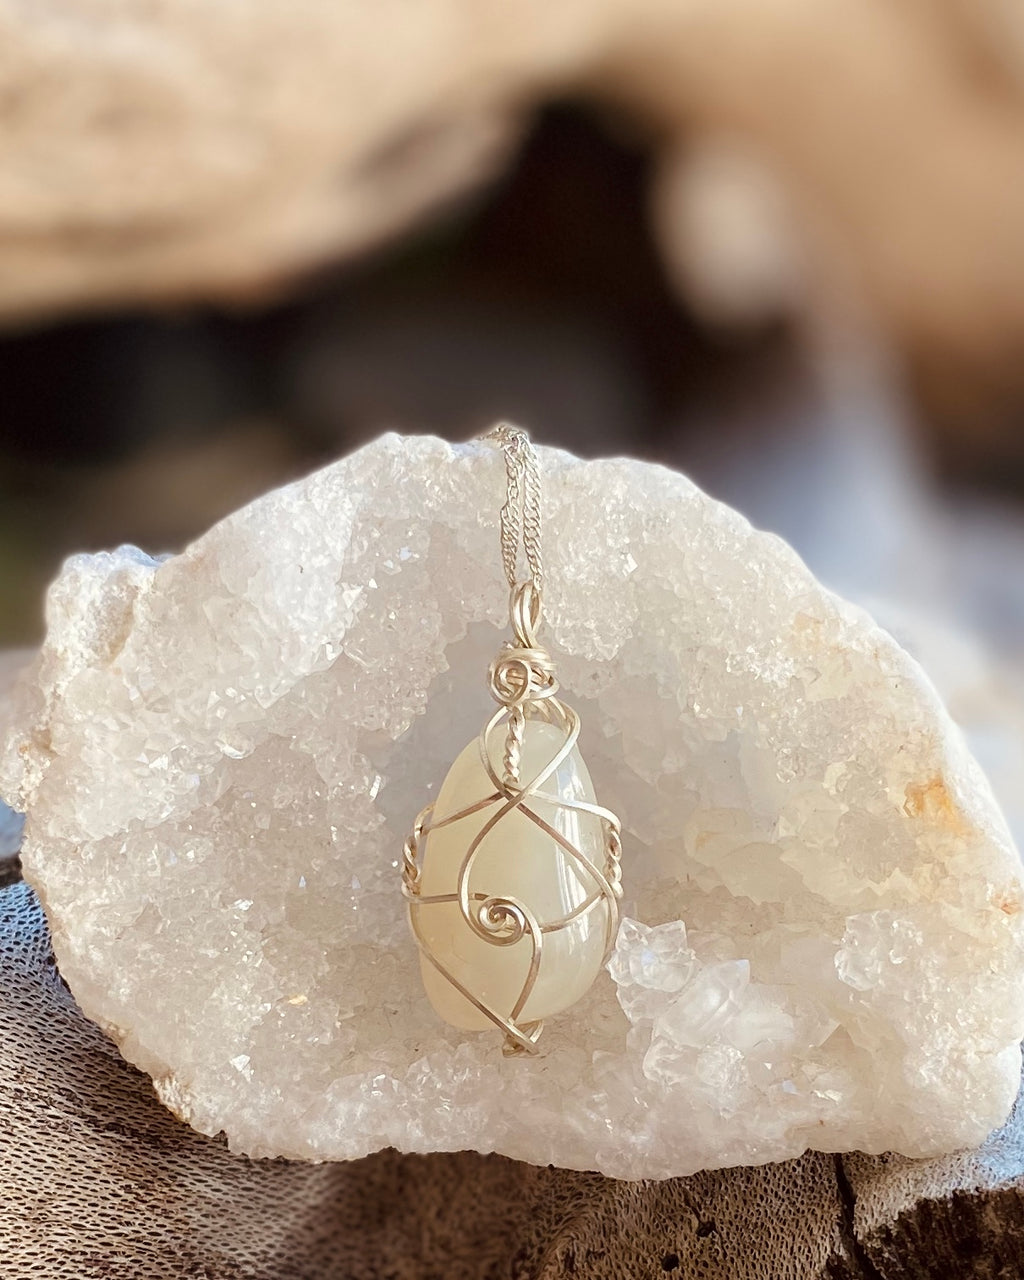 Artisan crafted natural Moonstone pendant necklace handmade in Byron Bay. Wrapped in eco friendly 925 sterling silver wire.